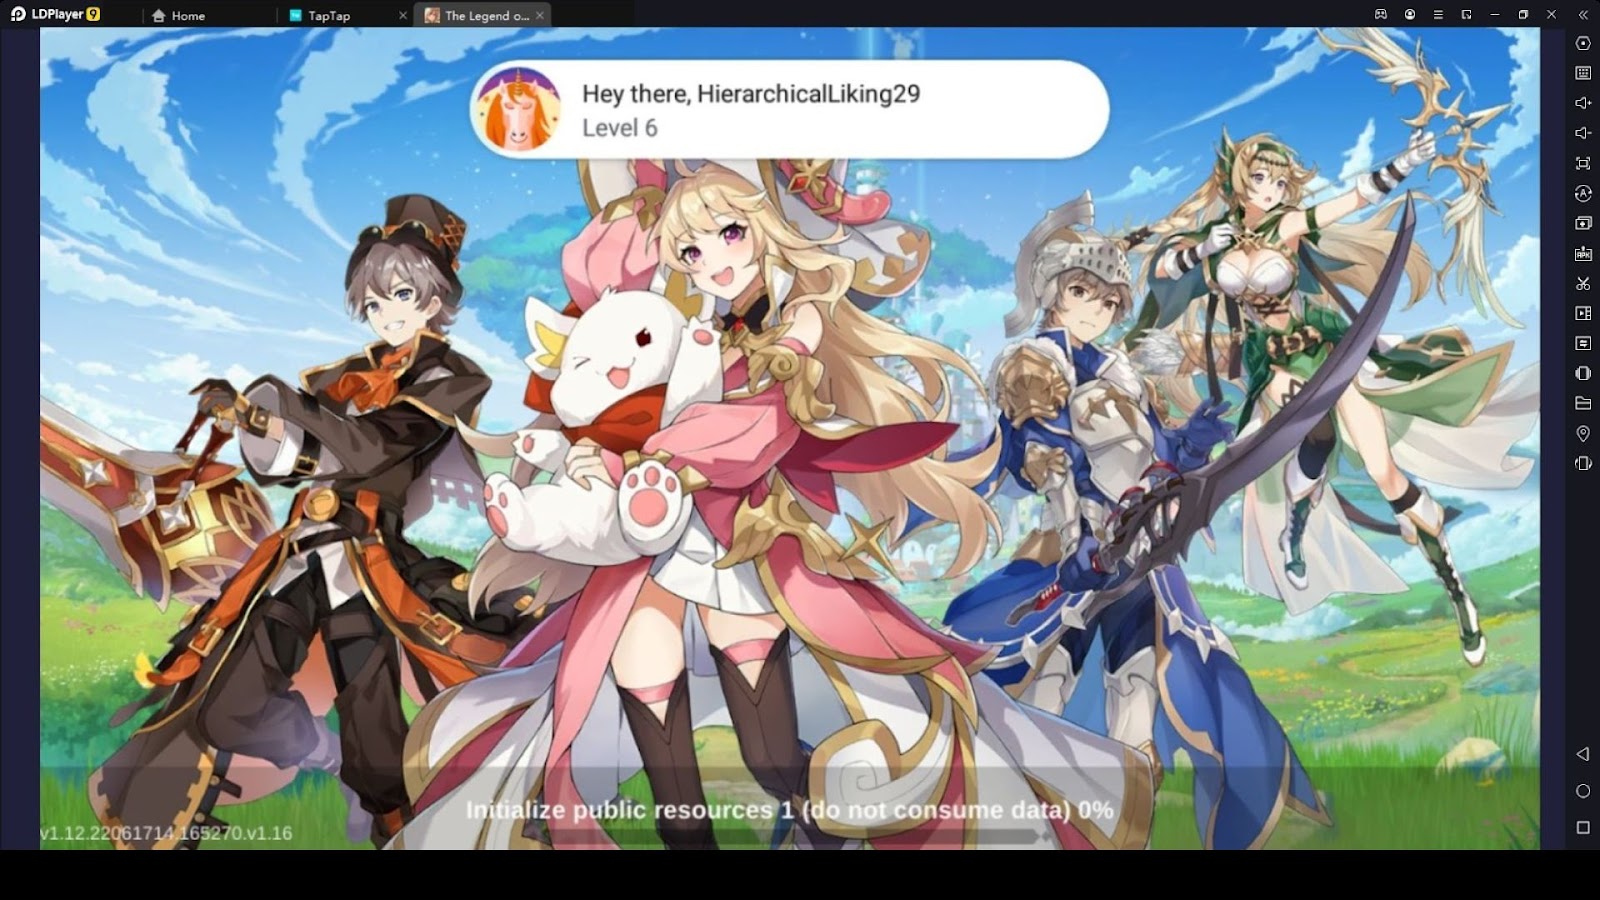 Download XP Animes APK latest v1.0 for Android